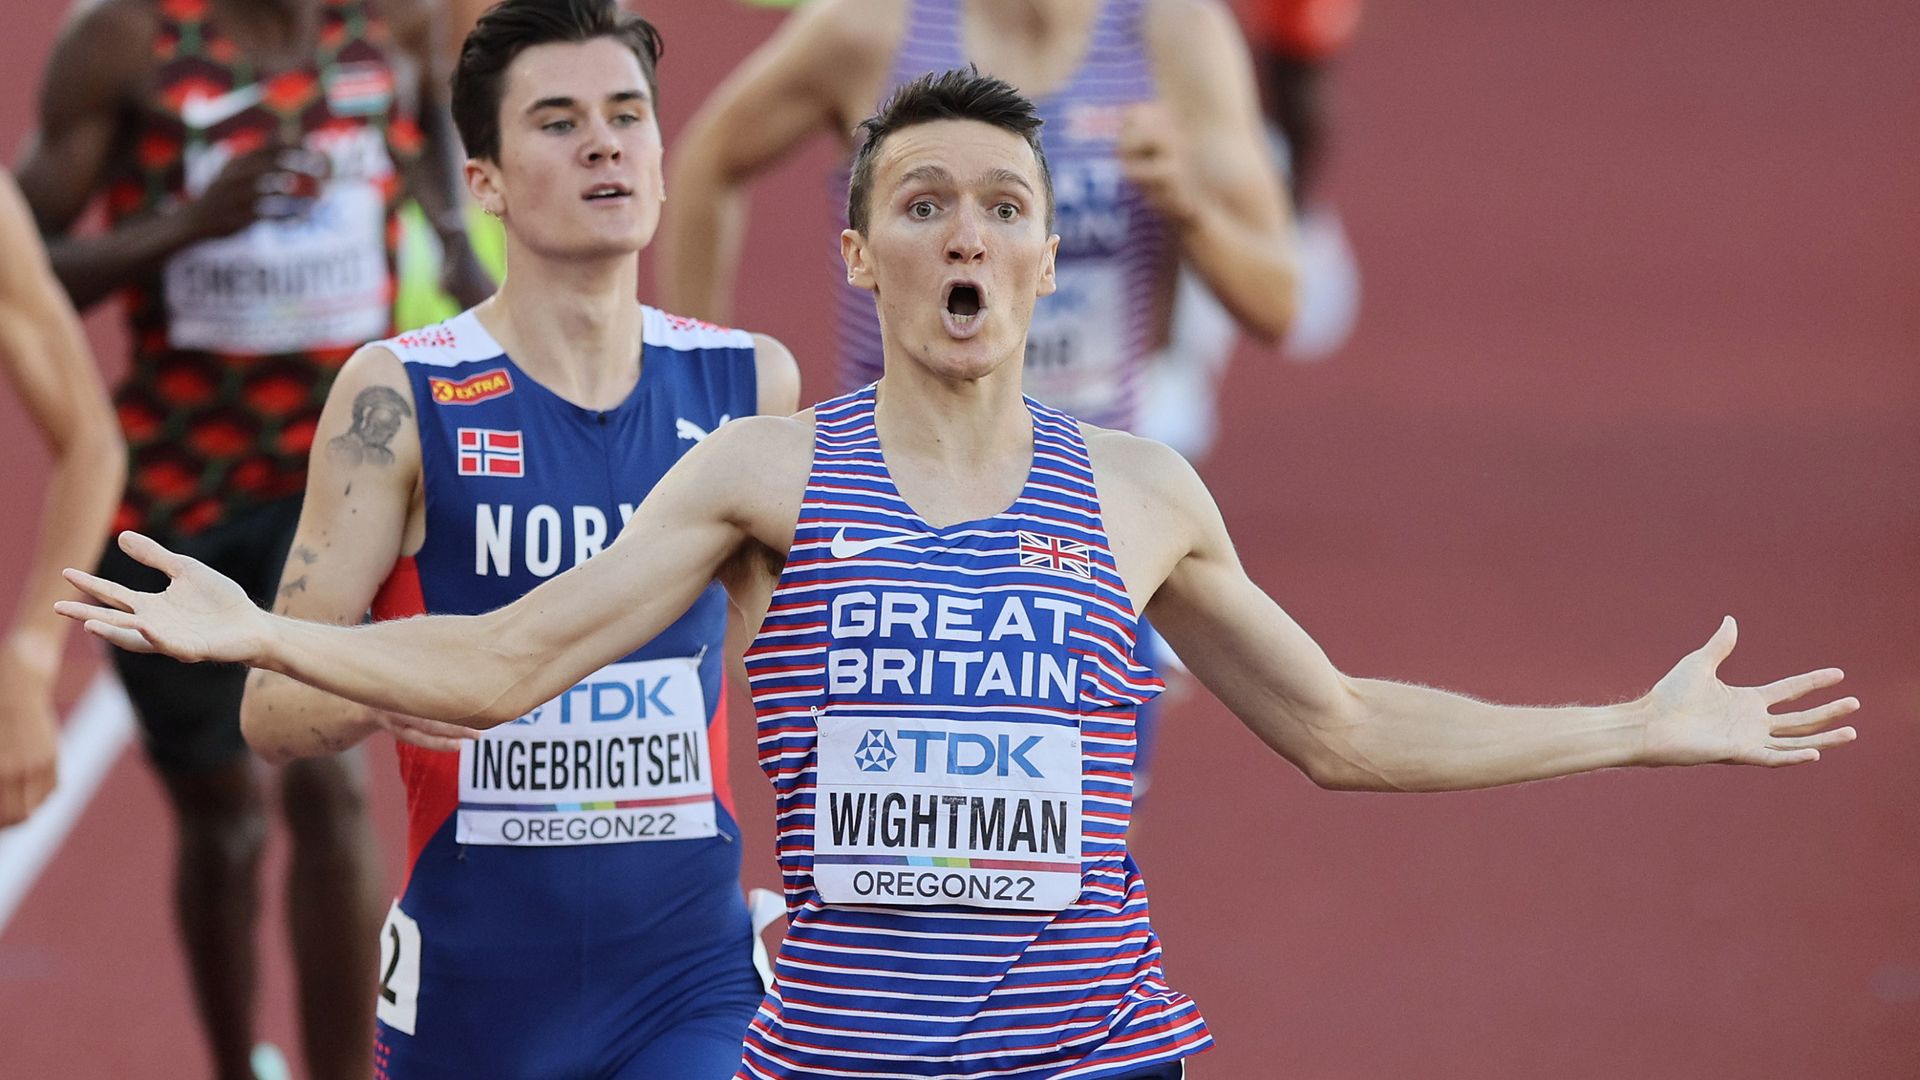 Wightman claims 1500m gold at World Championships | Dad commentates on win